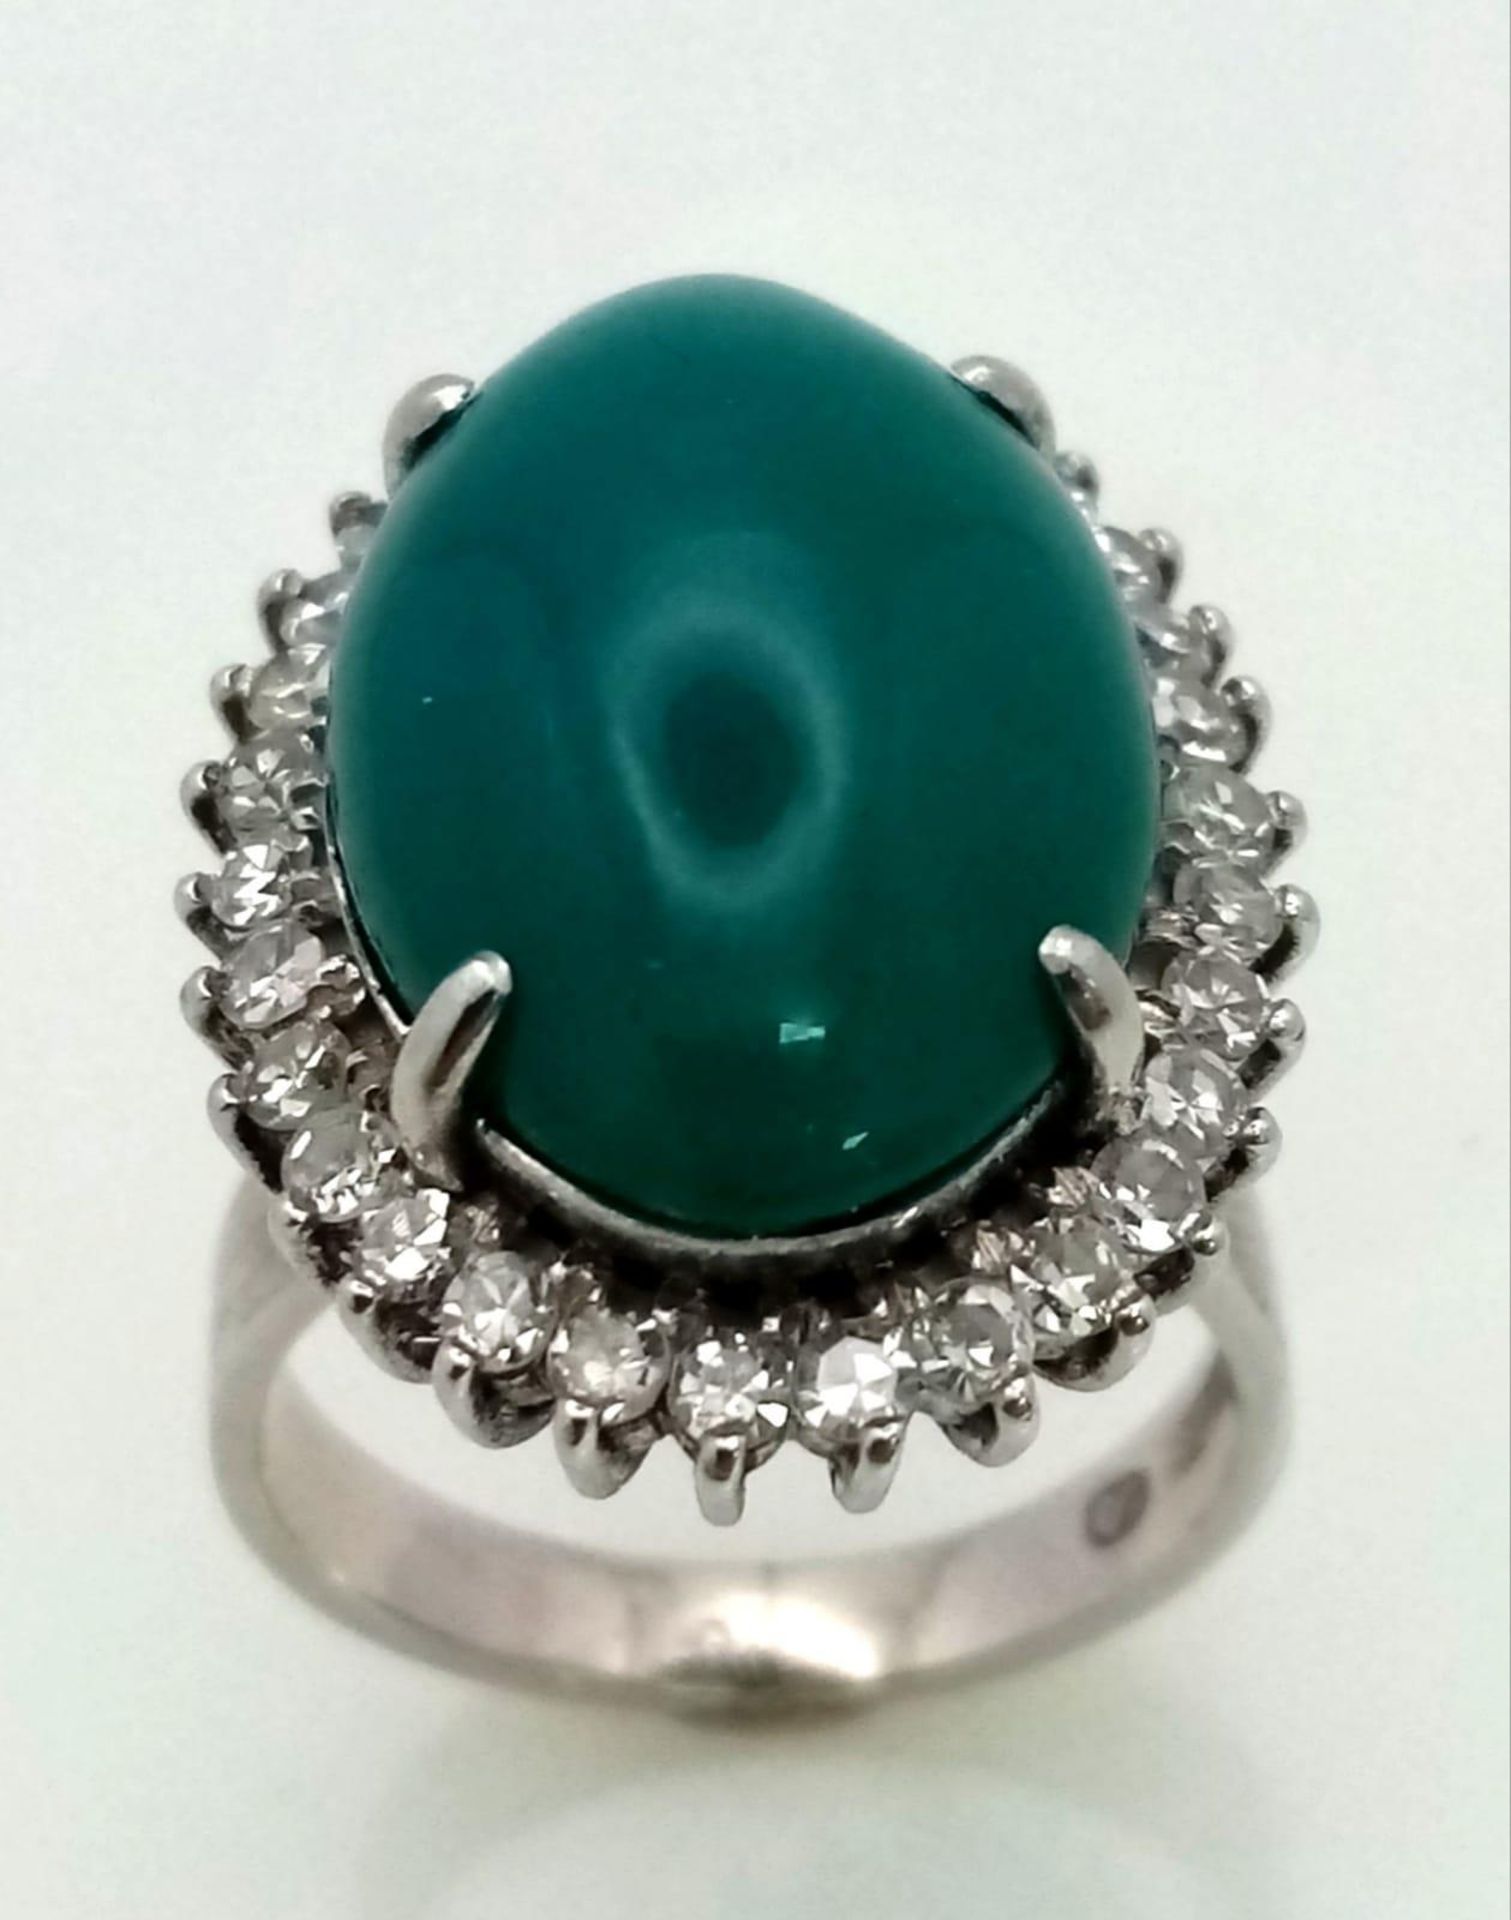 A 18K WHITE GOLD GREEN JADE CENTRE STONE SURROUNDED BY DIAMONDS RING . 0.66CT CABOCHON DIAMOND TOTAL - Image 2 of 9